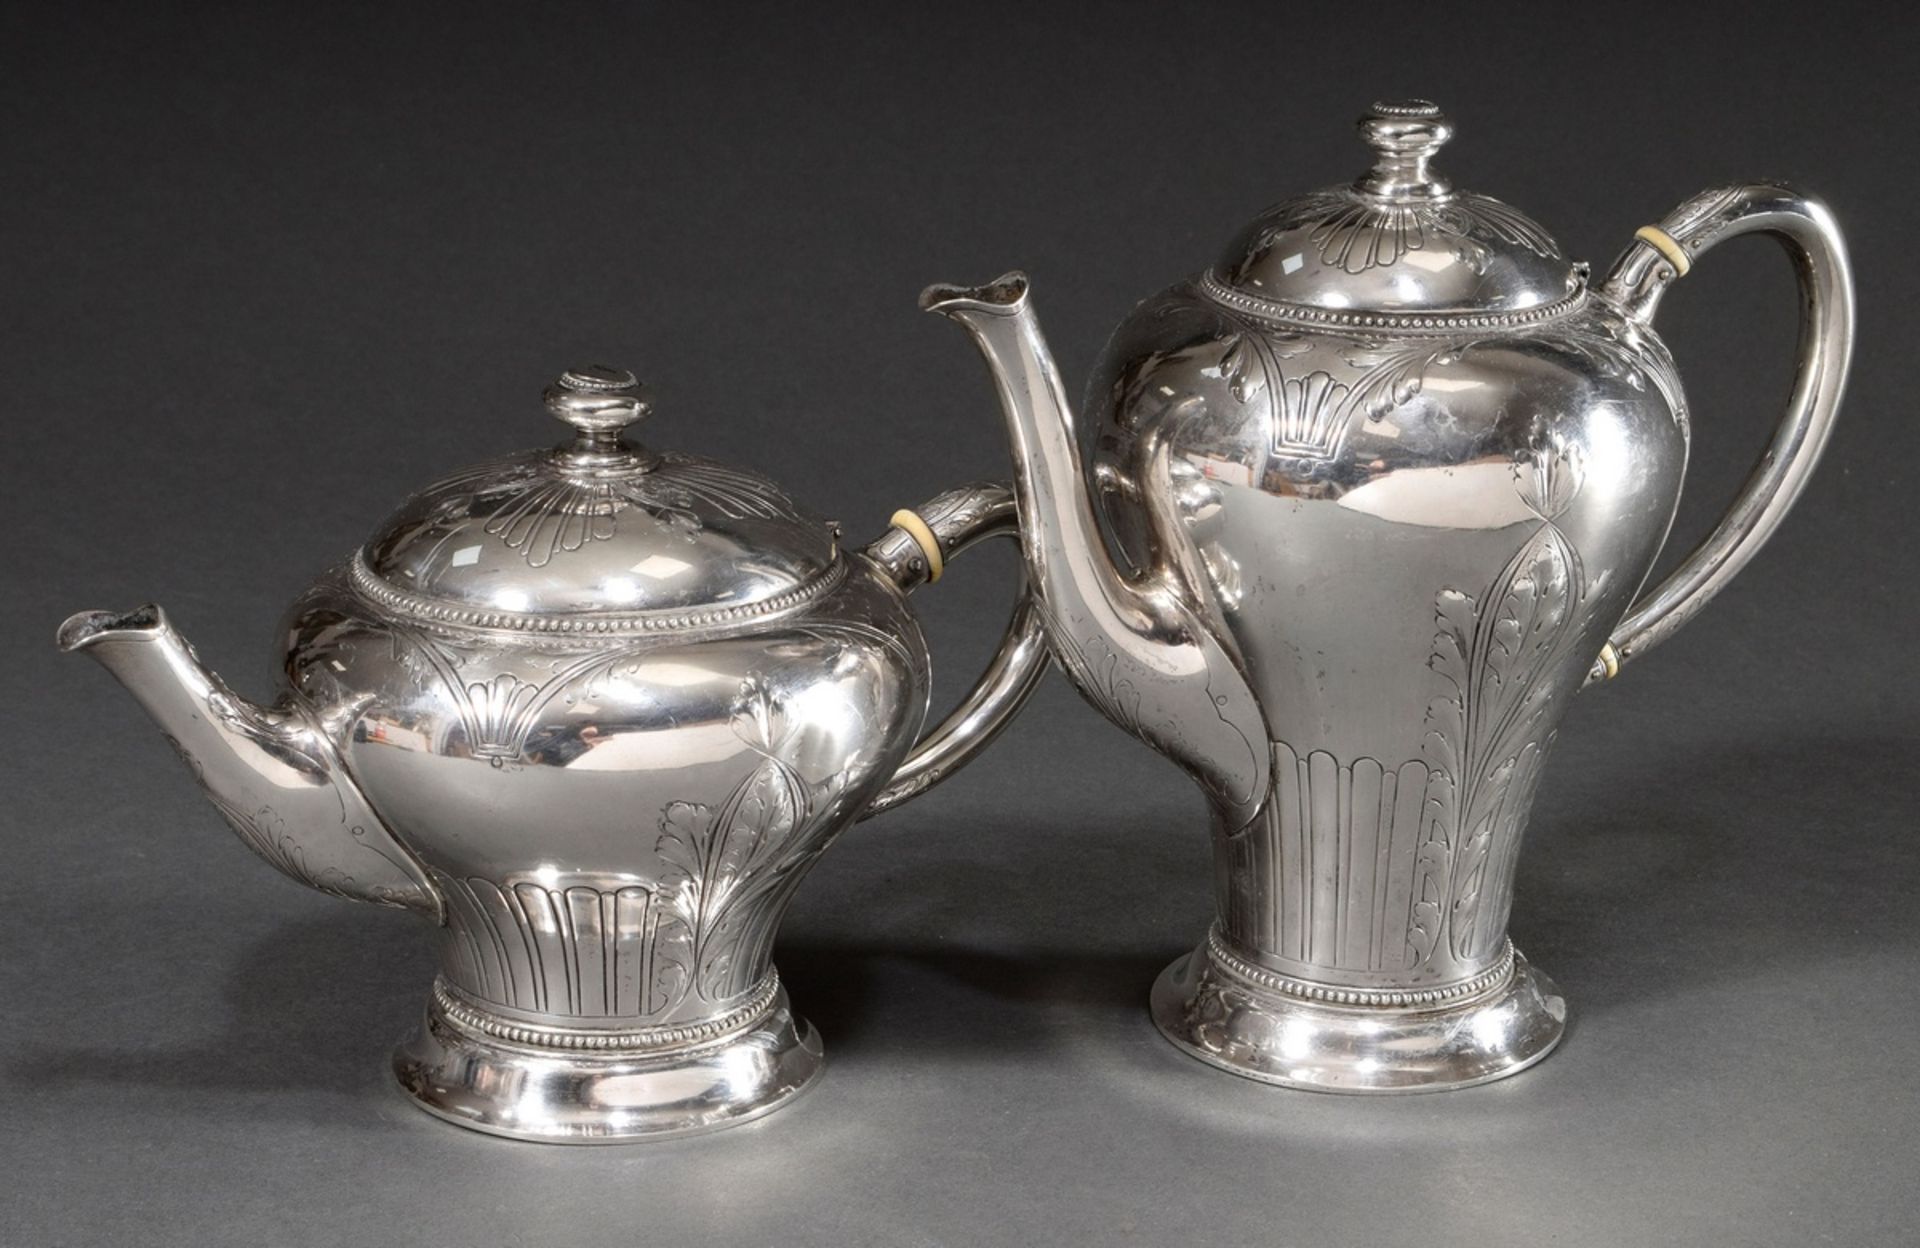 2 Various Art Nouveau coffee and tea pots with engraved and reliefed ornamental decoration and bead